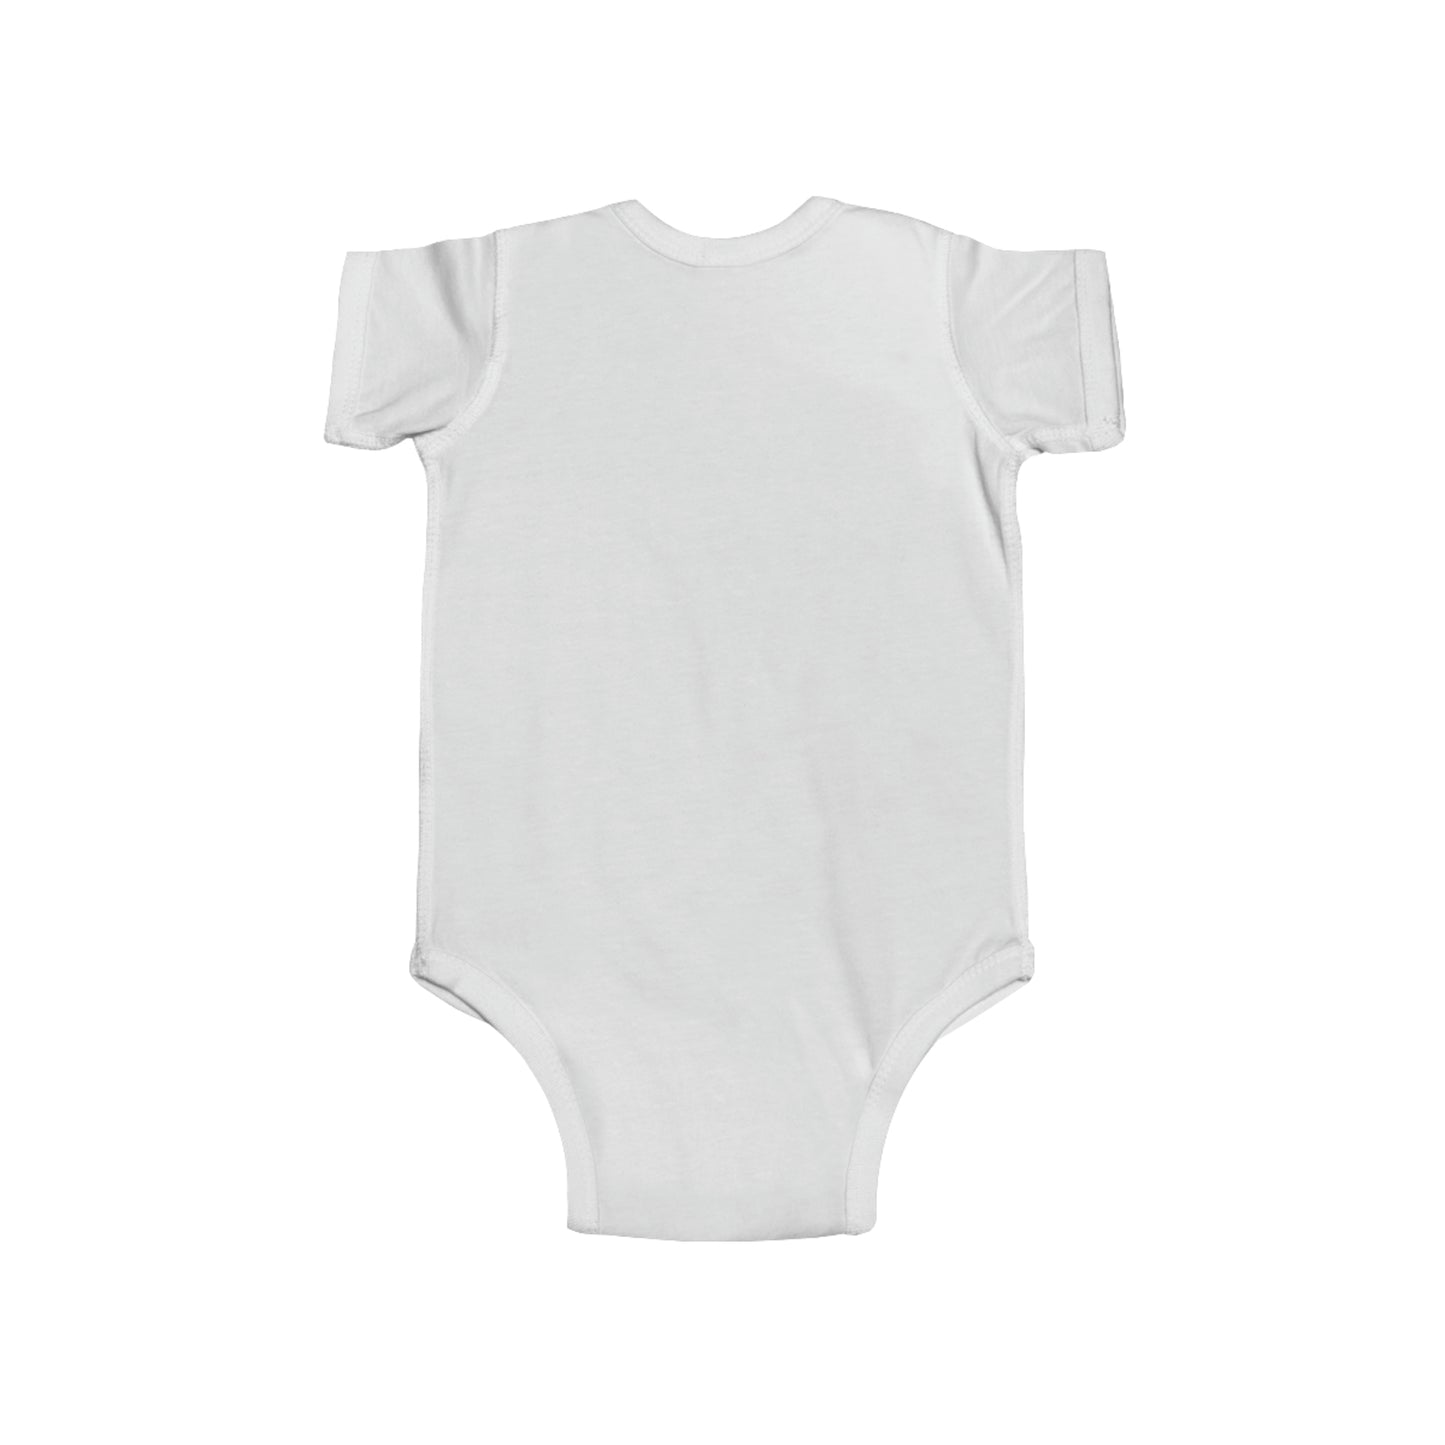 Proud Dragonfly: Brother! Fine Jersey Bodysuit